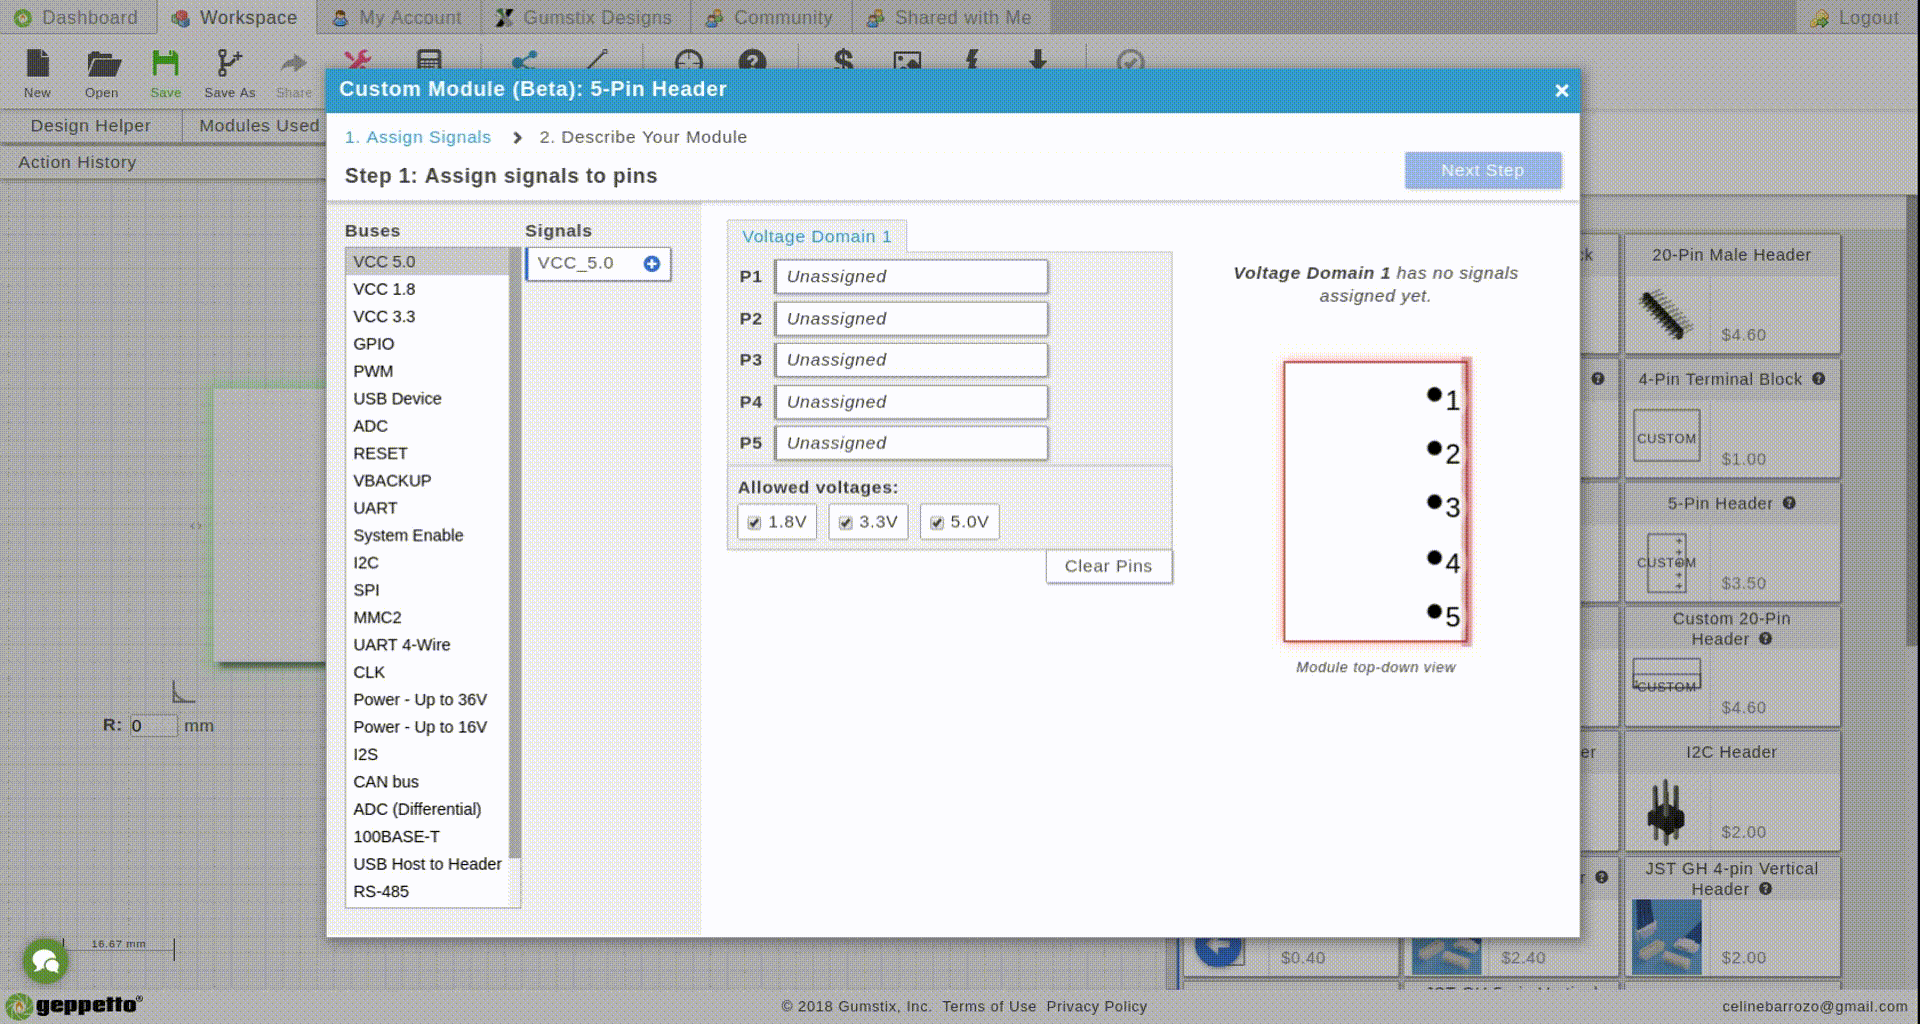 Select Buses and Add Signals to each pin of the custom header